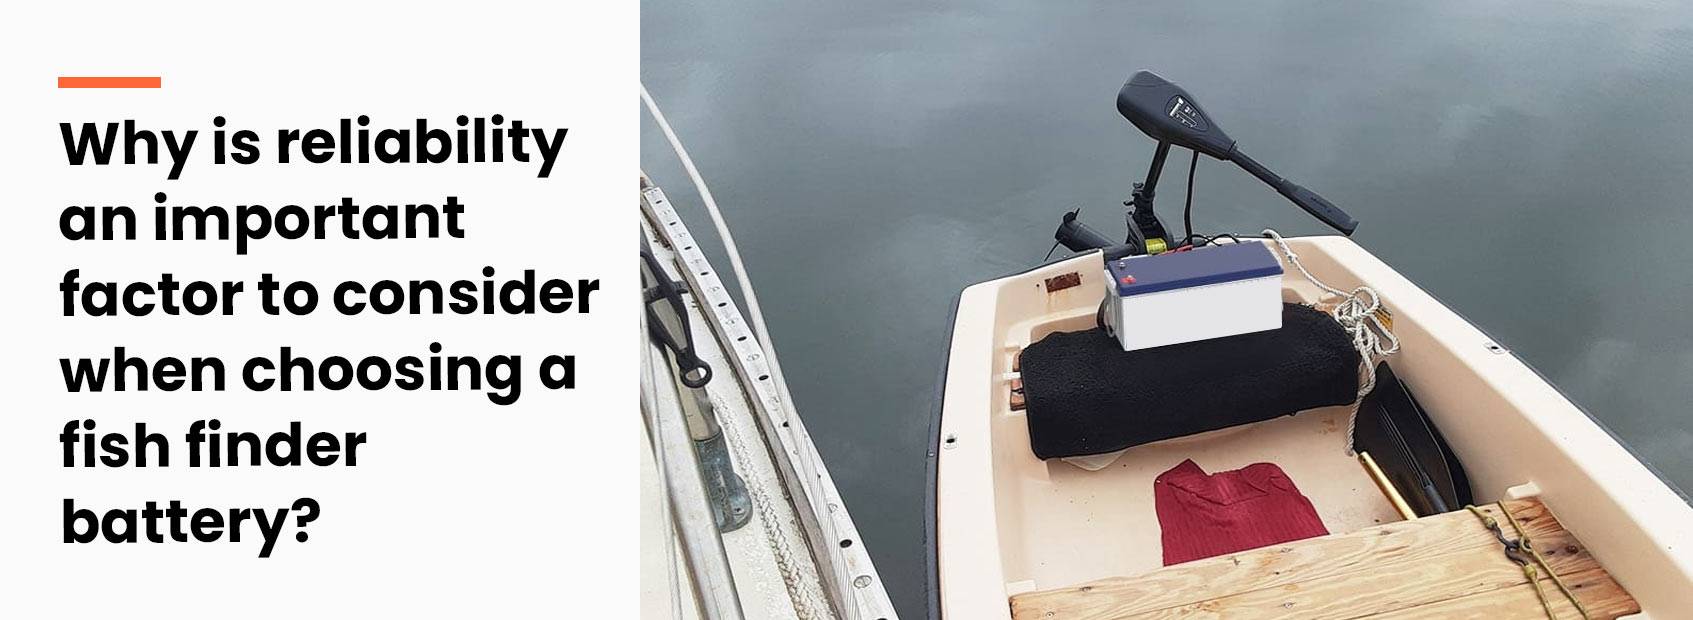 Why is reliability an important factor to consider when choosing a fish finder battery?